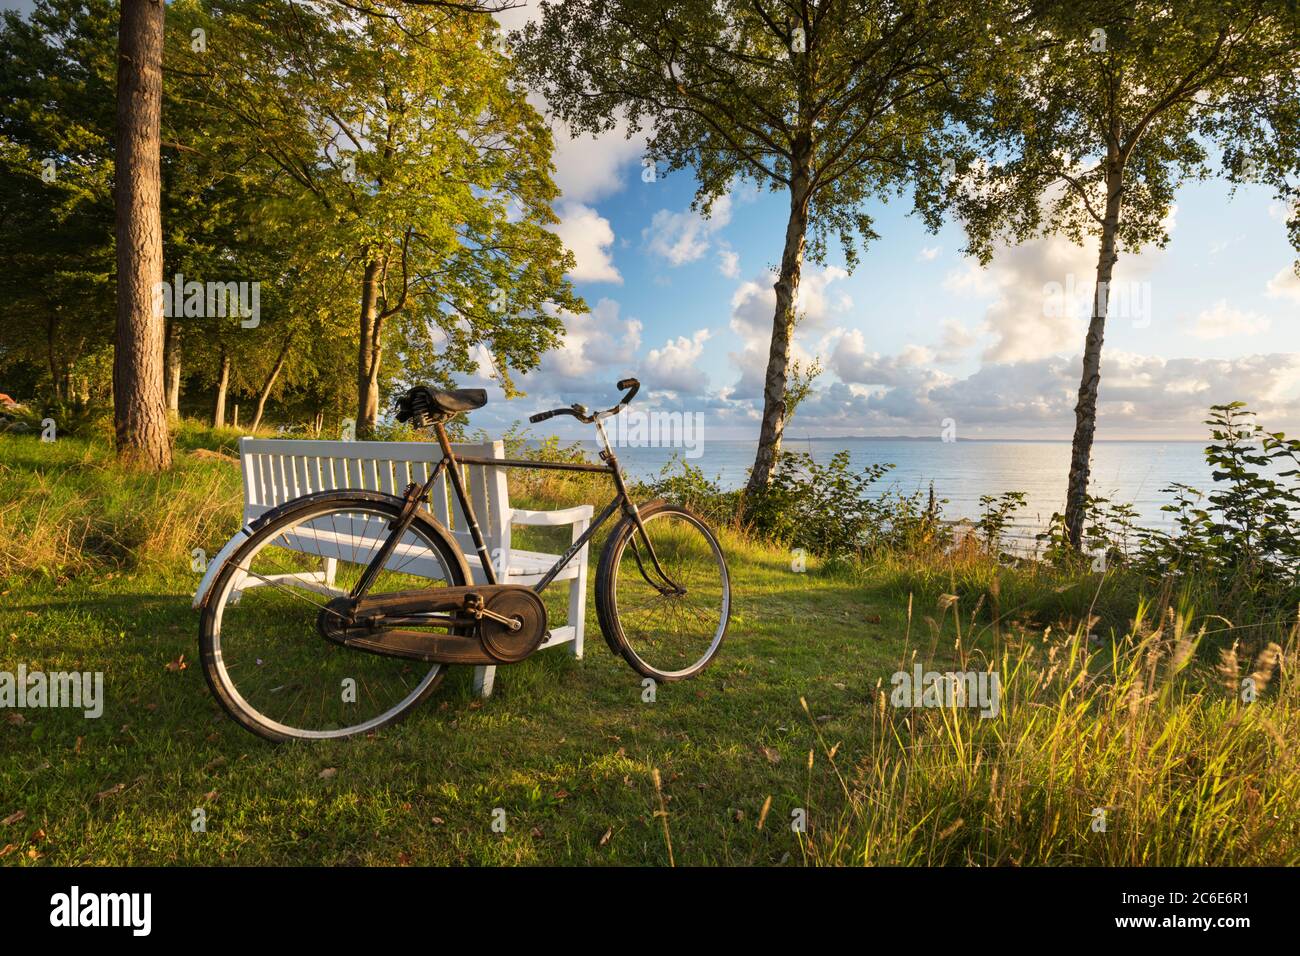 Old bicycle leaning against white bench overlooking the sea framed by silver birch and pine trees, Munkerup, Kattegat Coast, Zealand, Denmark, Europe Stock Photo